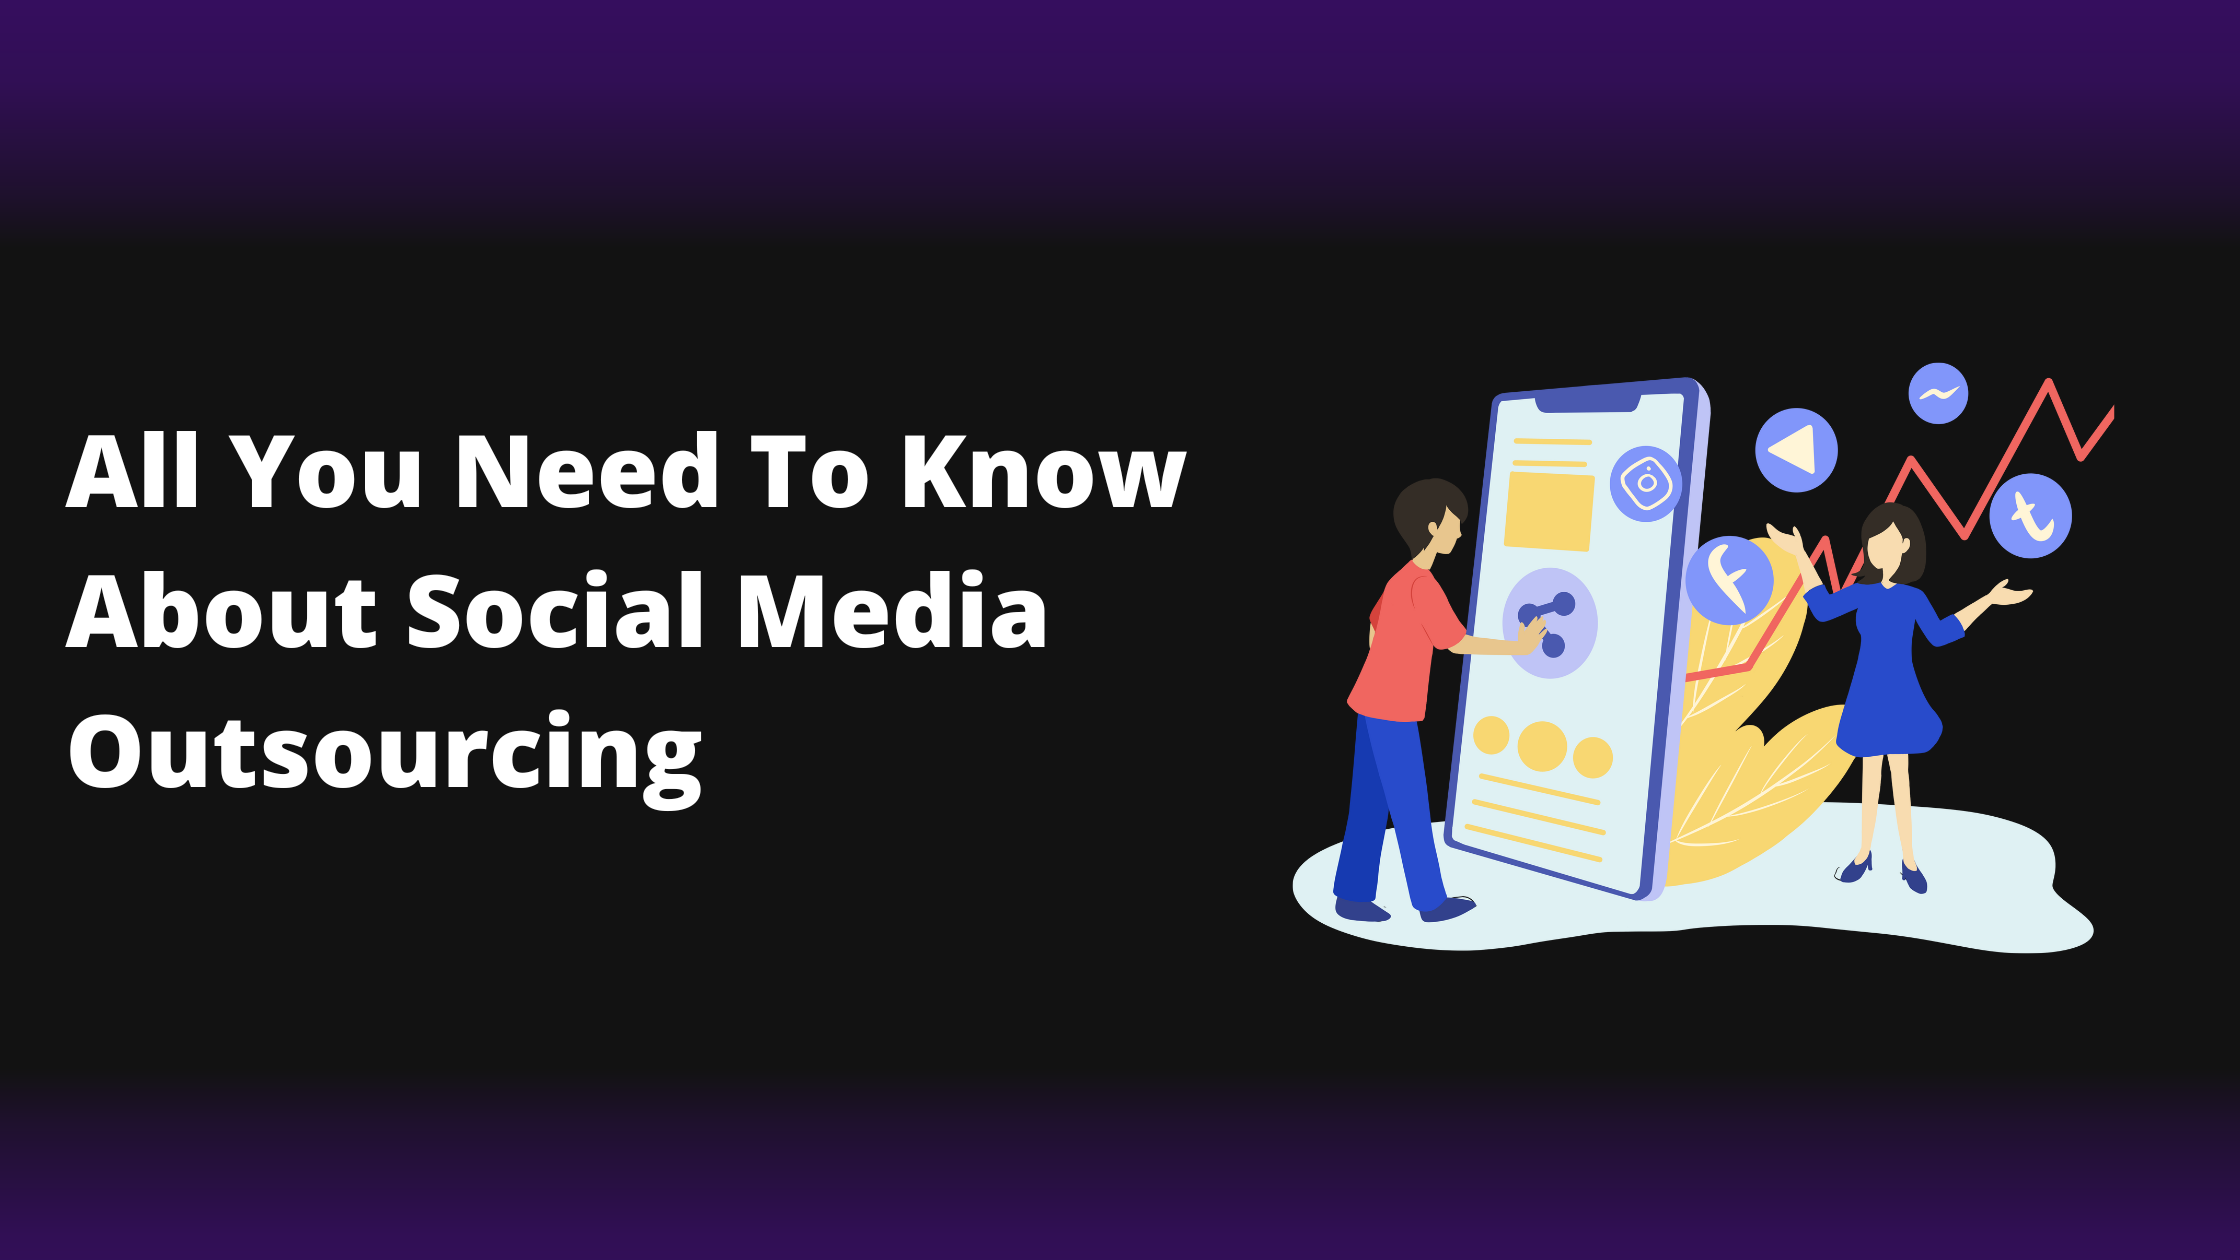 All you need to know about Social Media Outsourcing